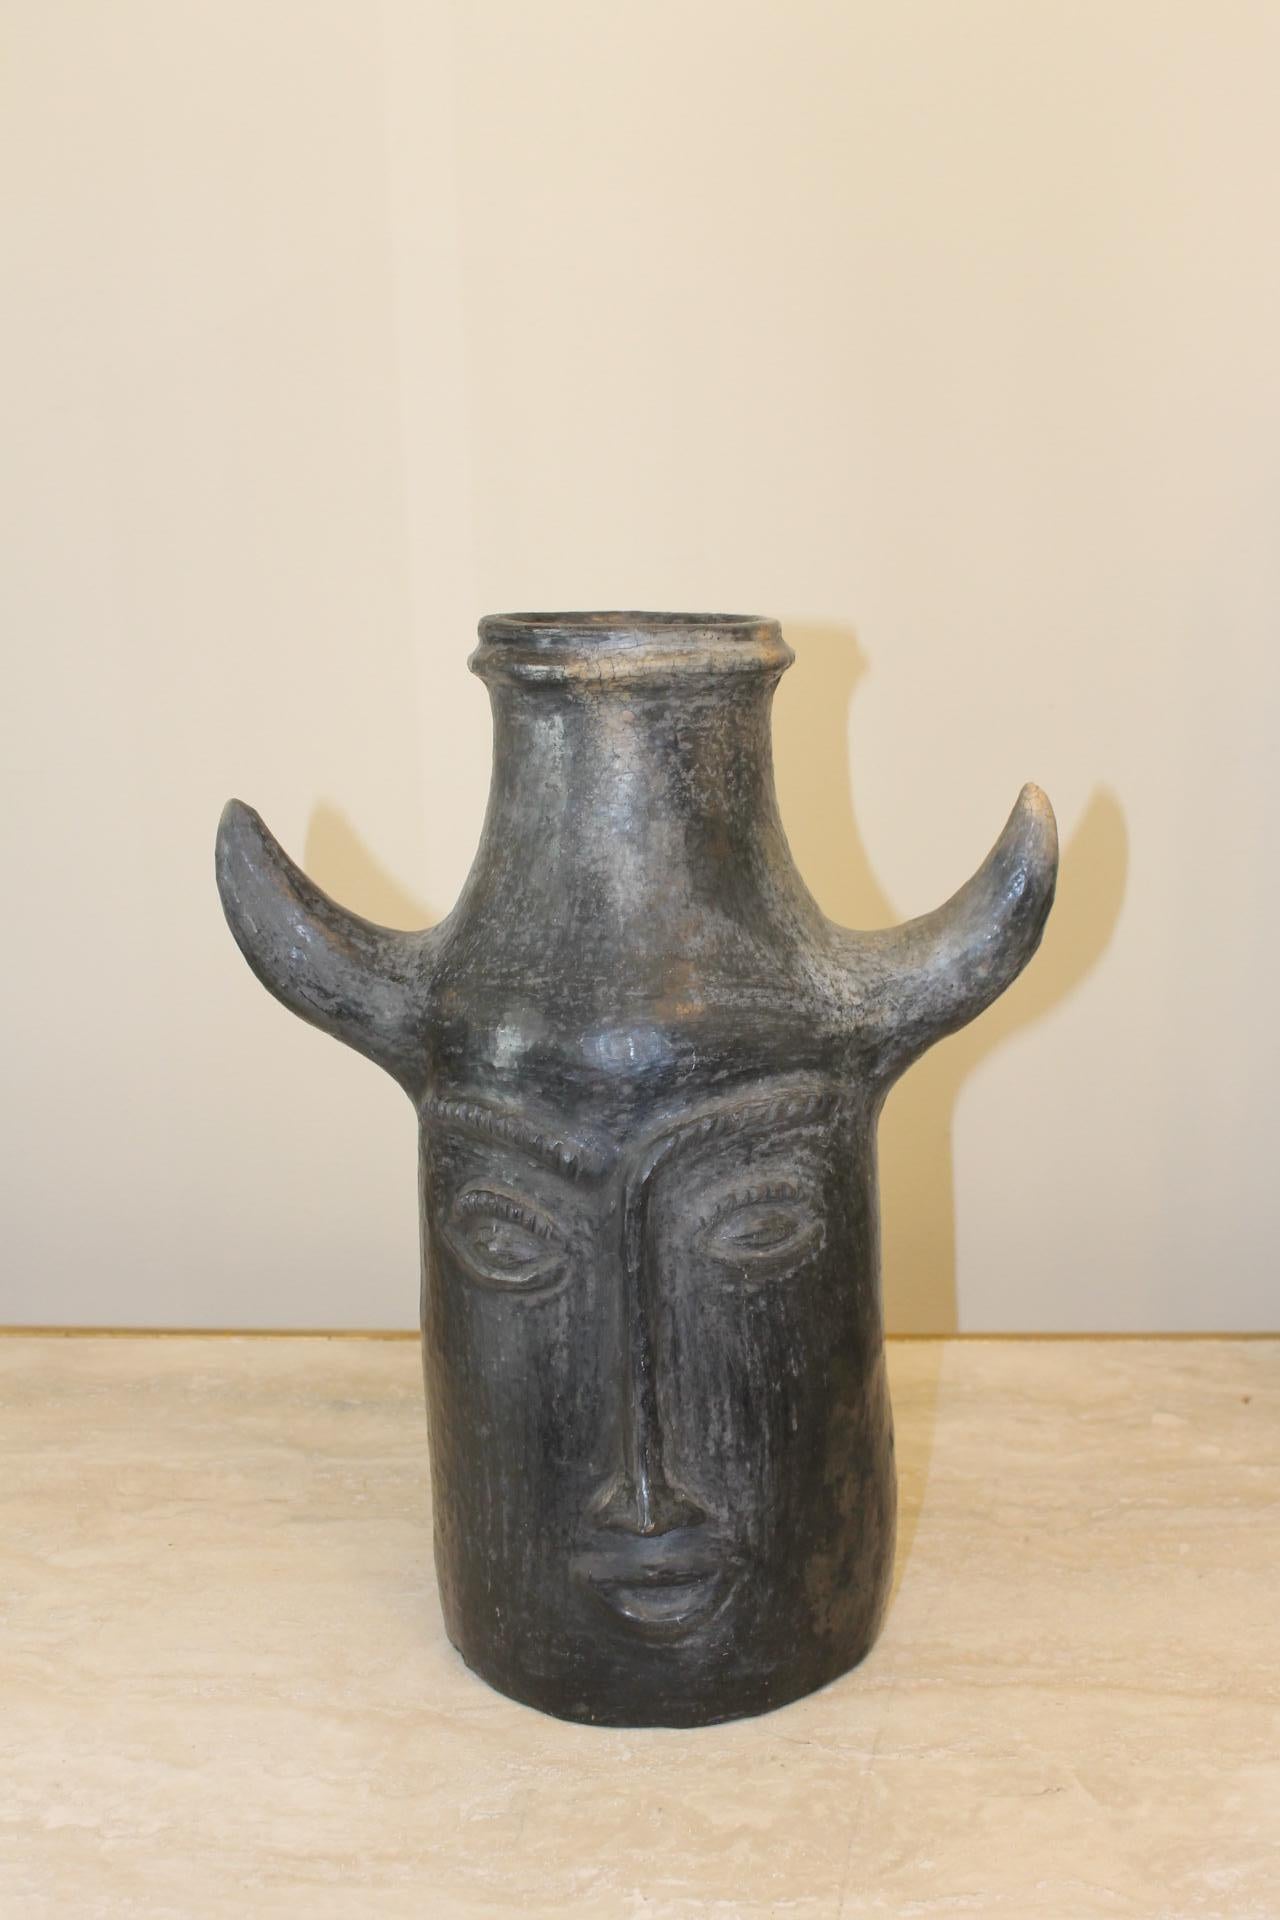 Terracotta sculpture representing an African head in the style of Picasso
.
This pottery is a unique model made by hand, fired in a wood oven.